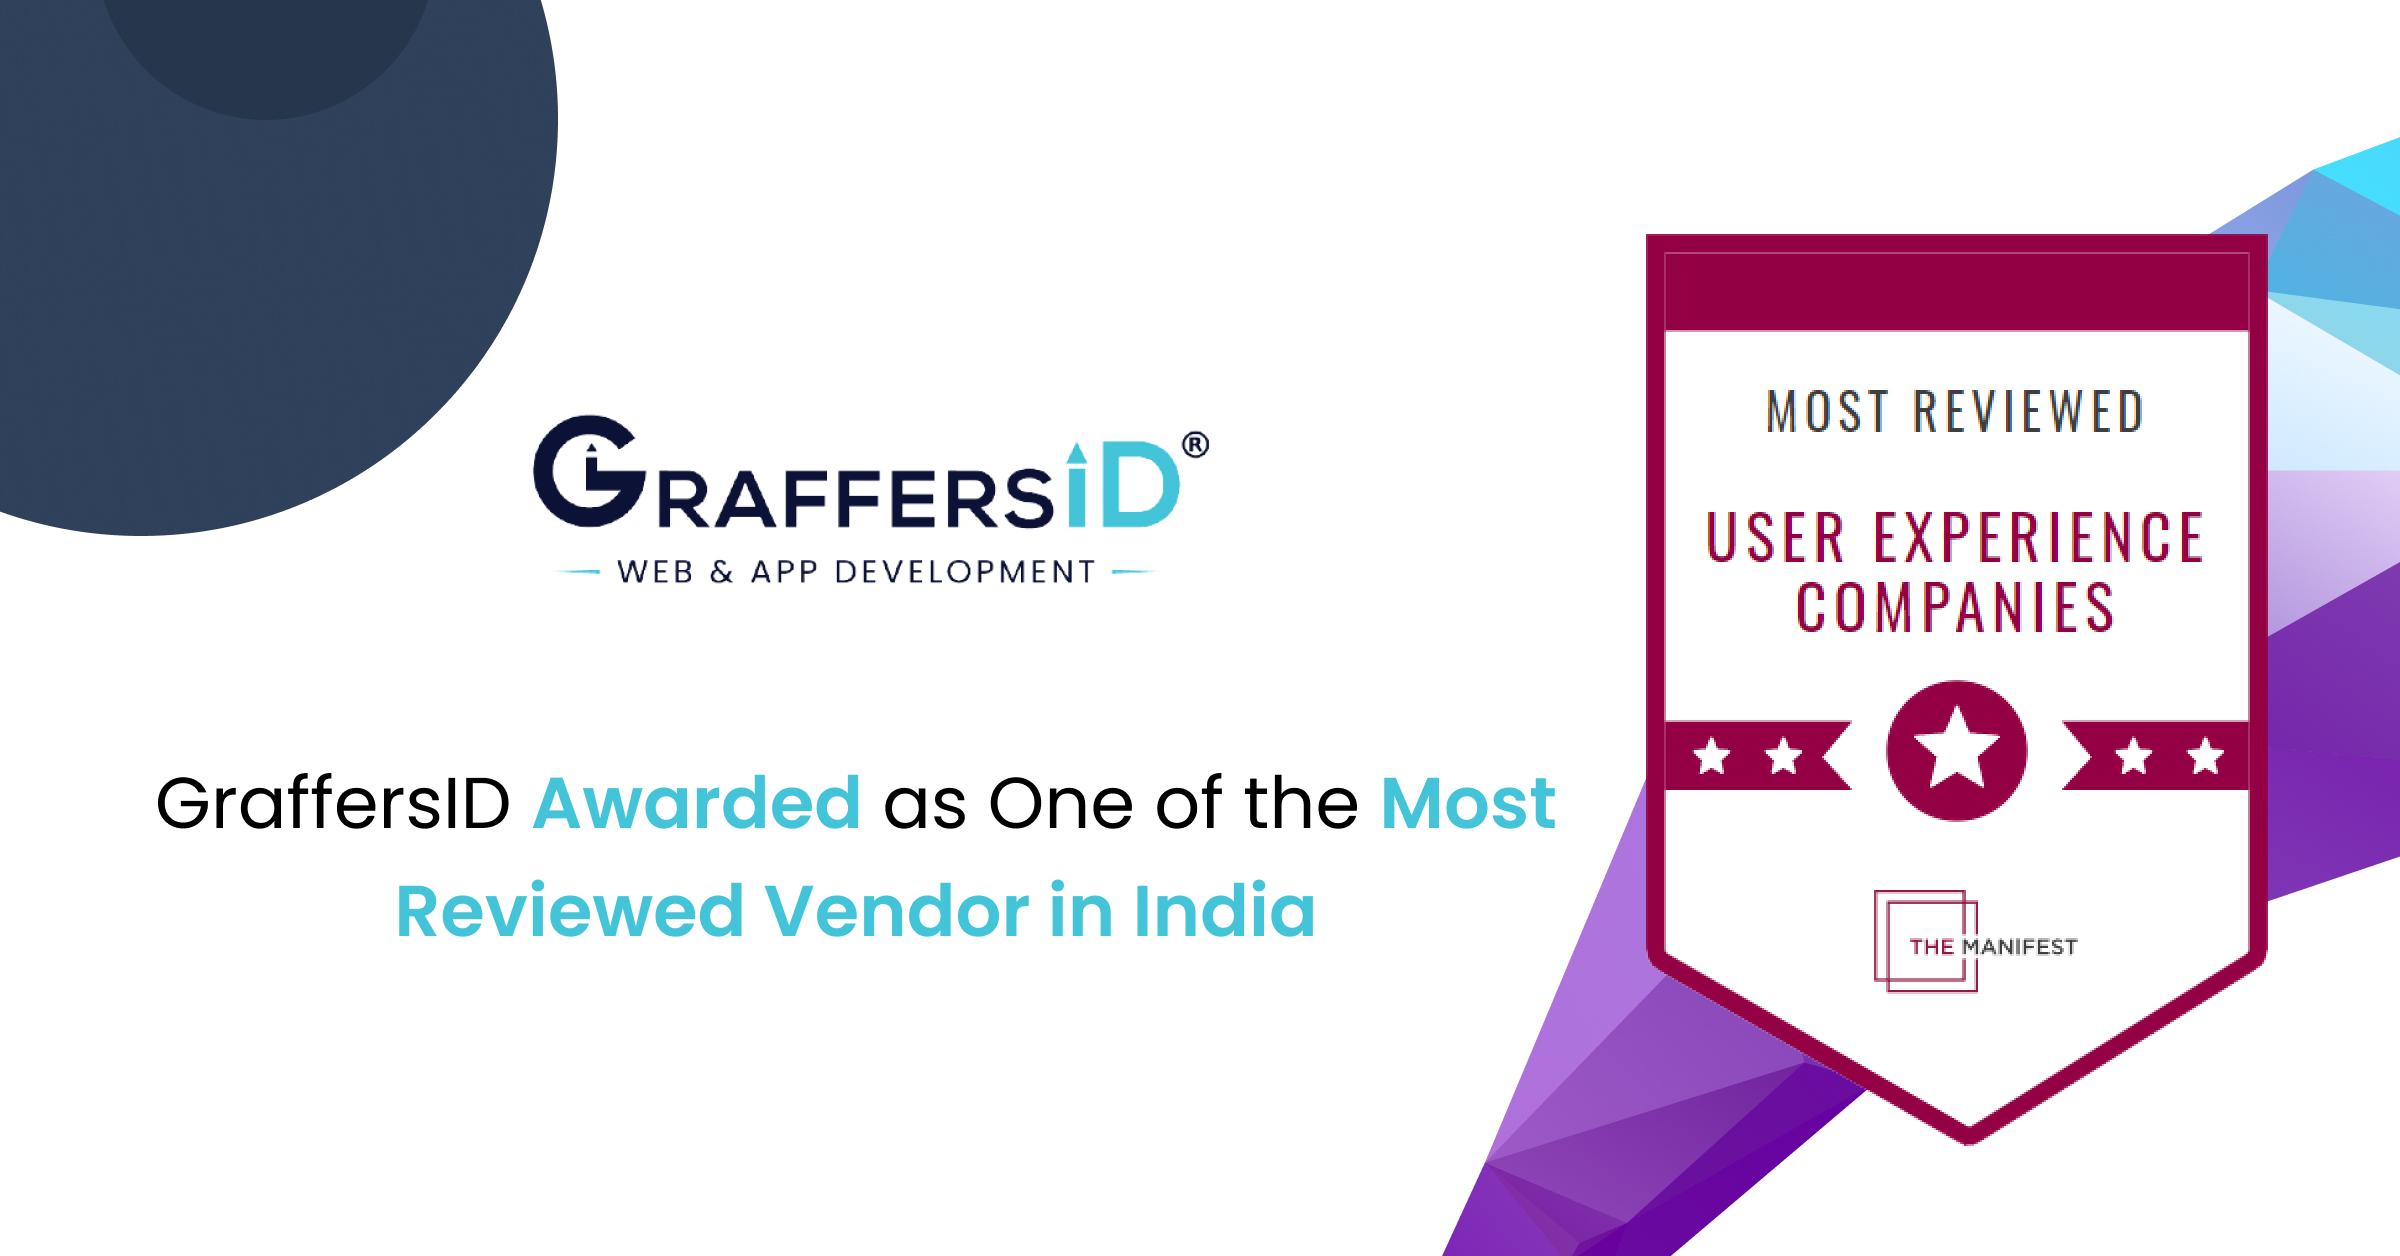 GraffersID Awarded as One of the Most Reviewed Vendor in India